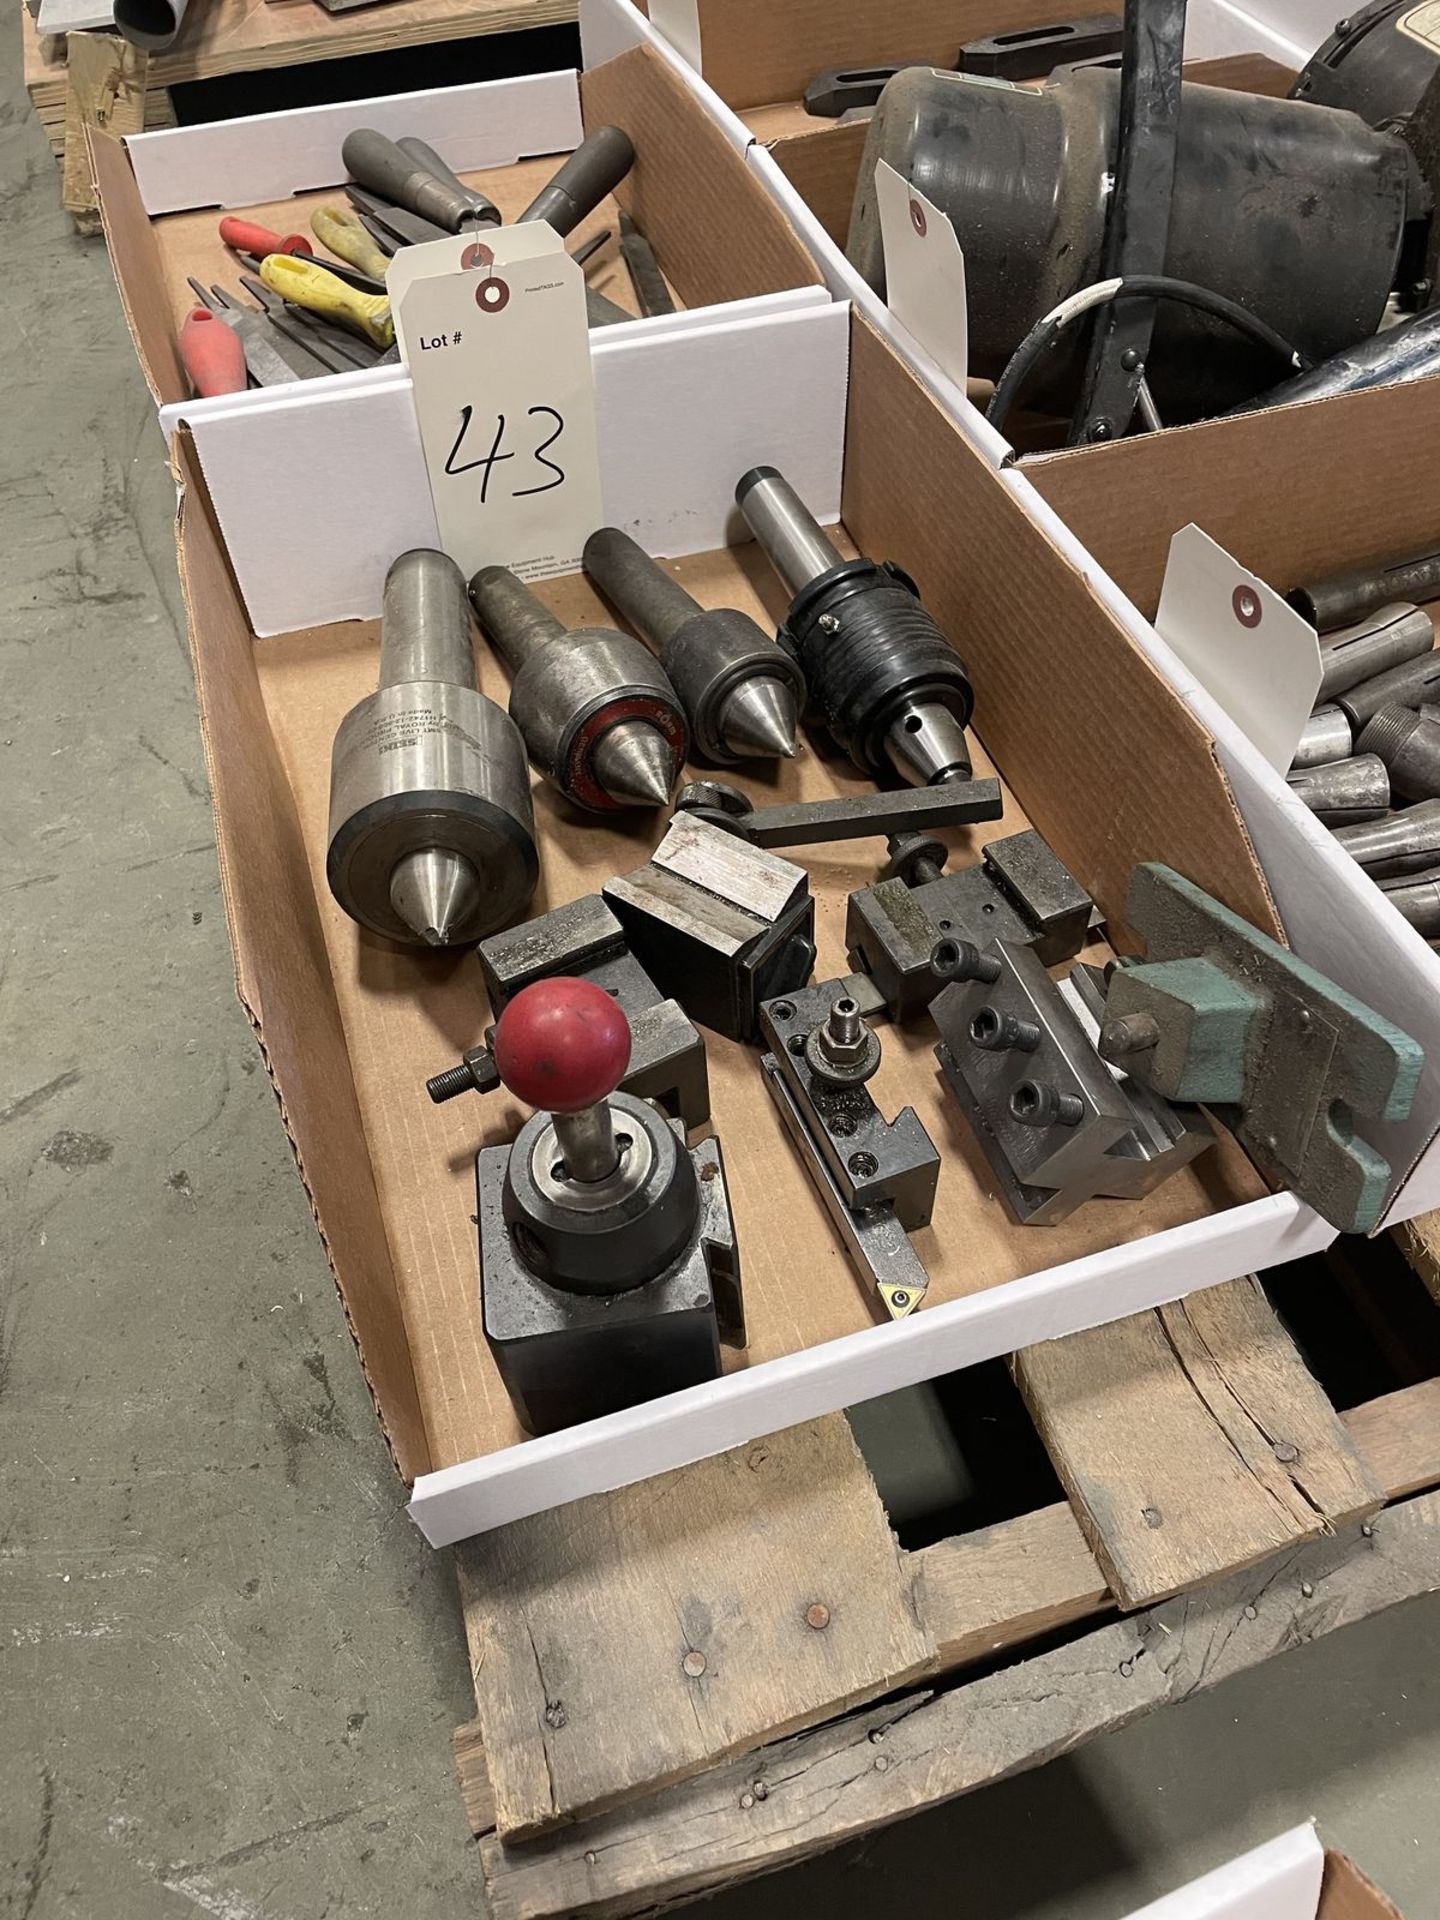 Assortment of Lathe Tools - Centers, Quick Change Tool Holders